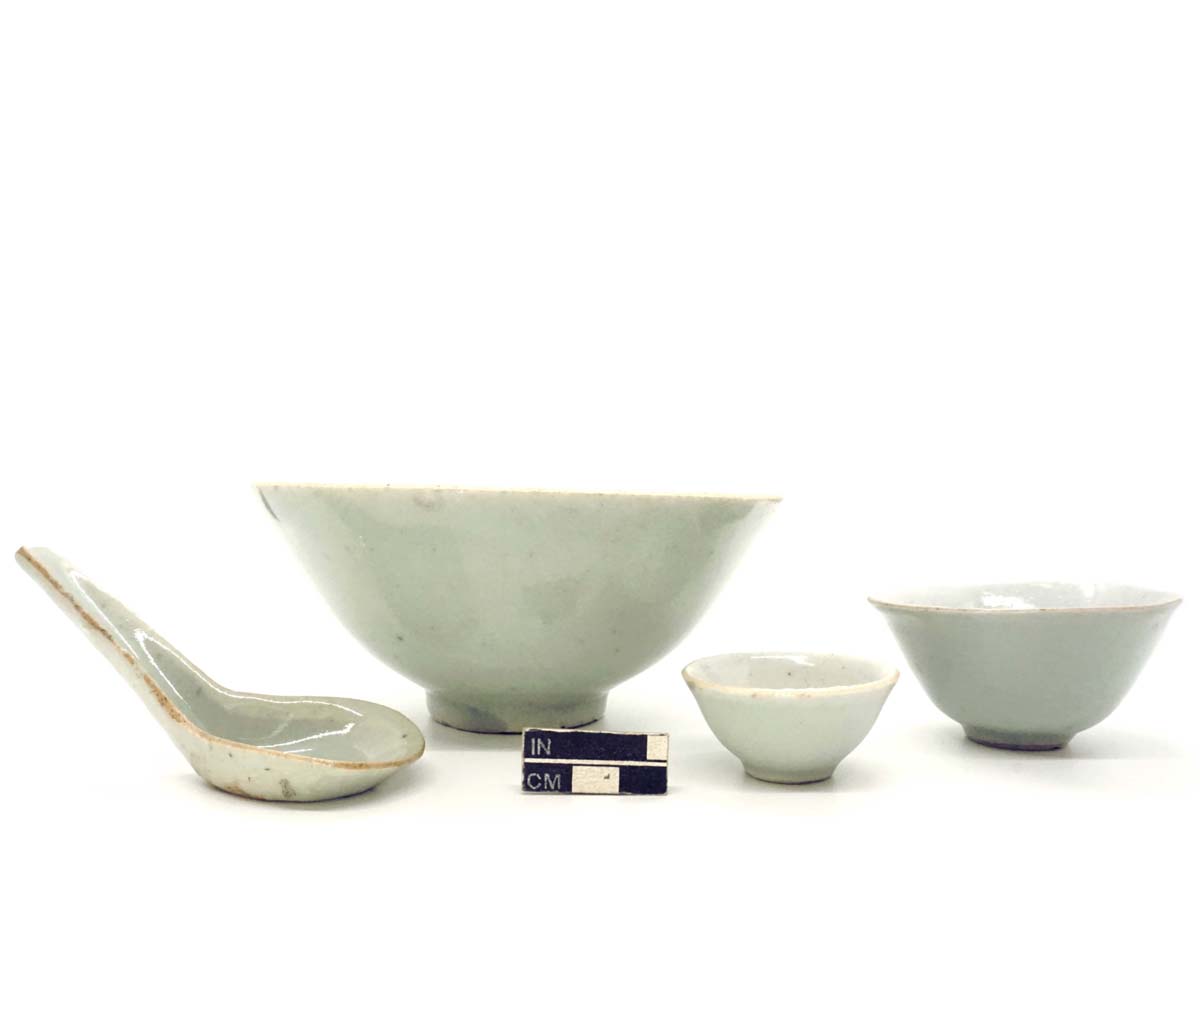 Spoon, rice bowl, liquor cup, and teacup with “Winter Green” glaze, porcelain.